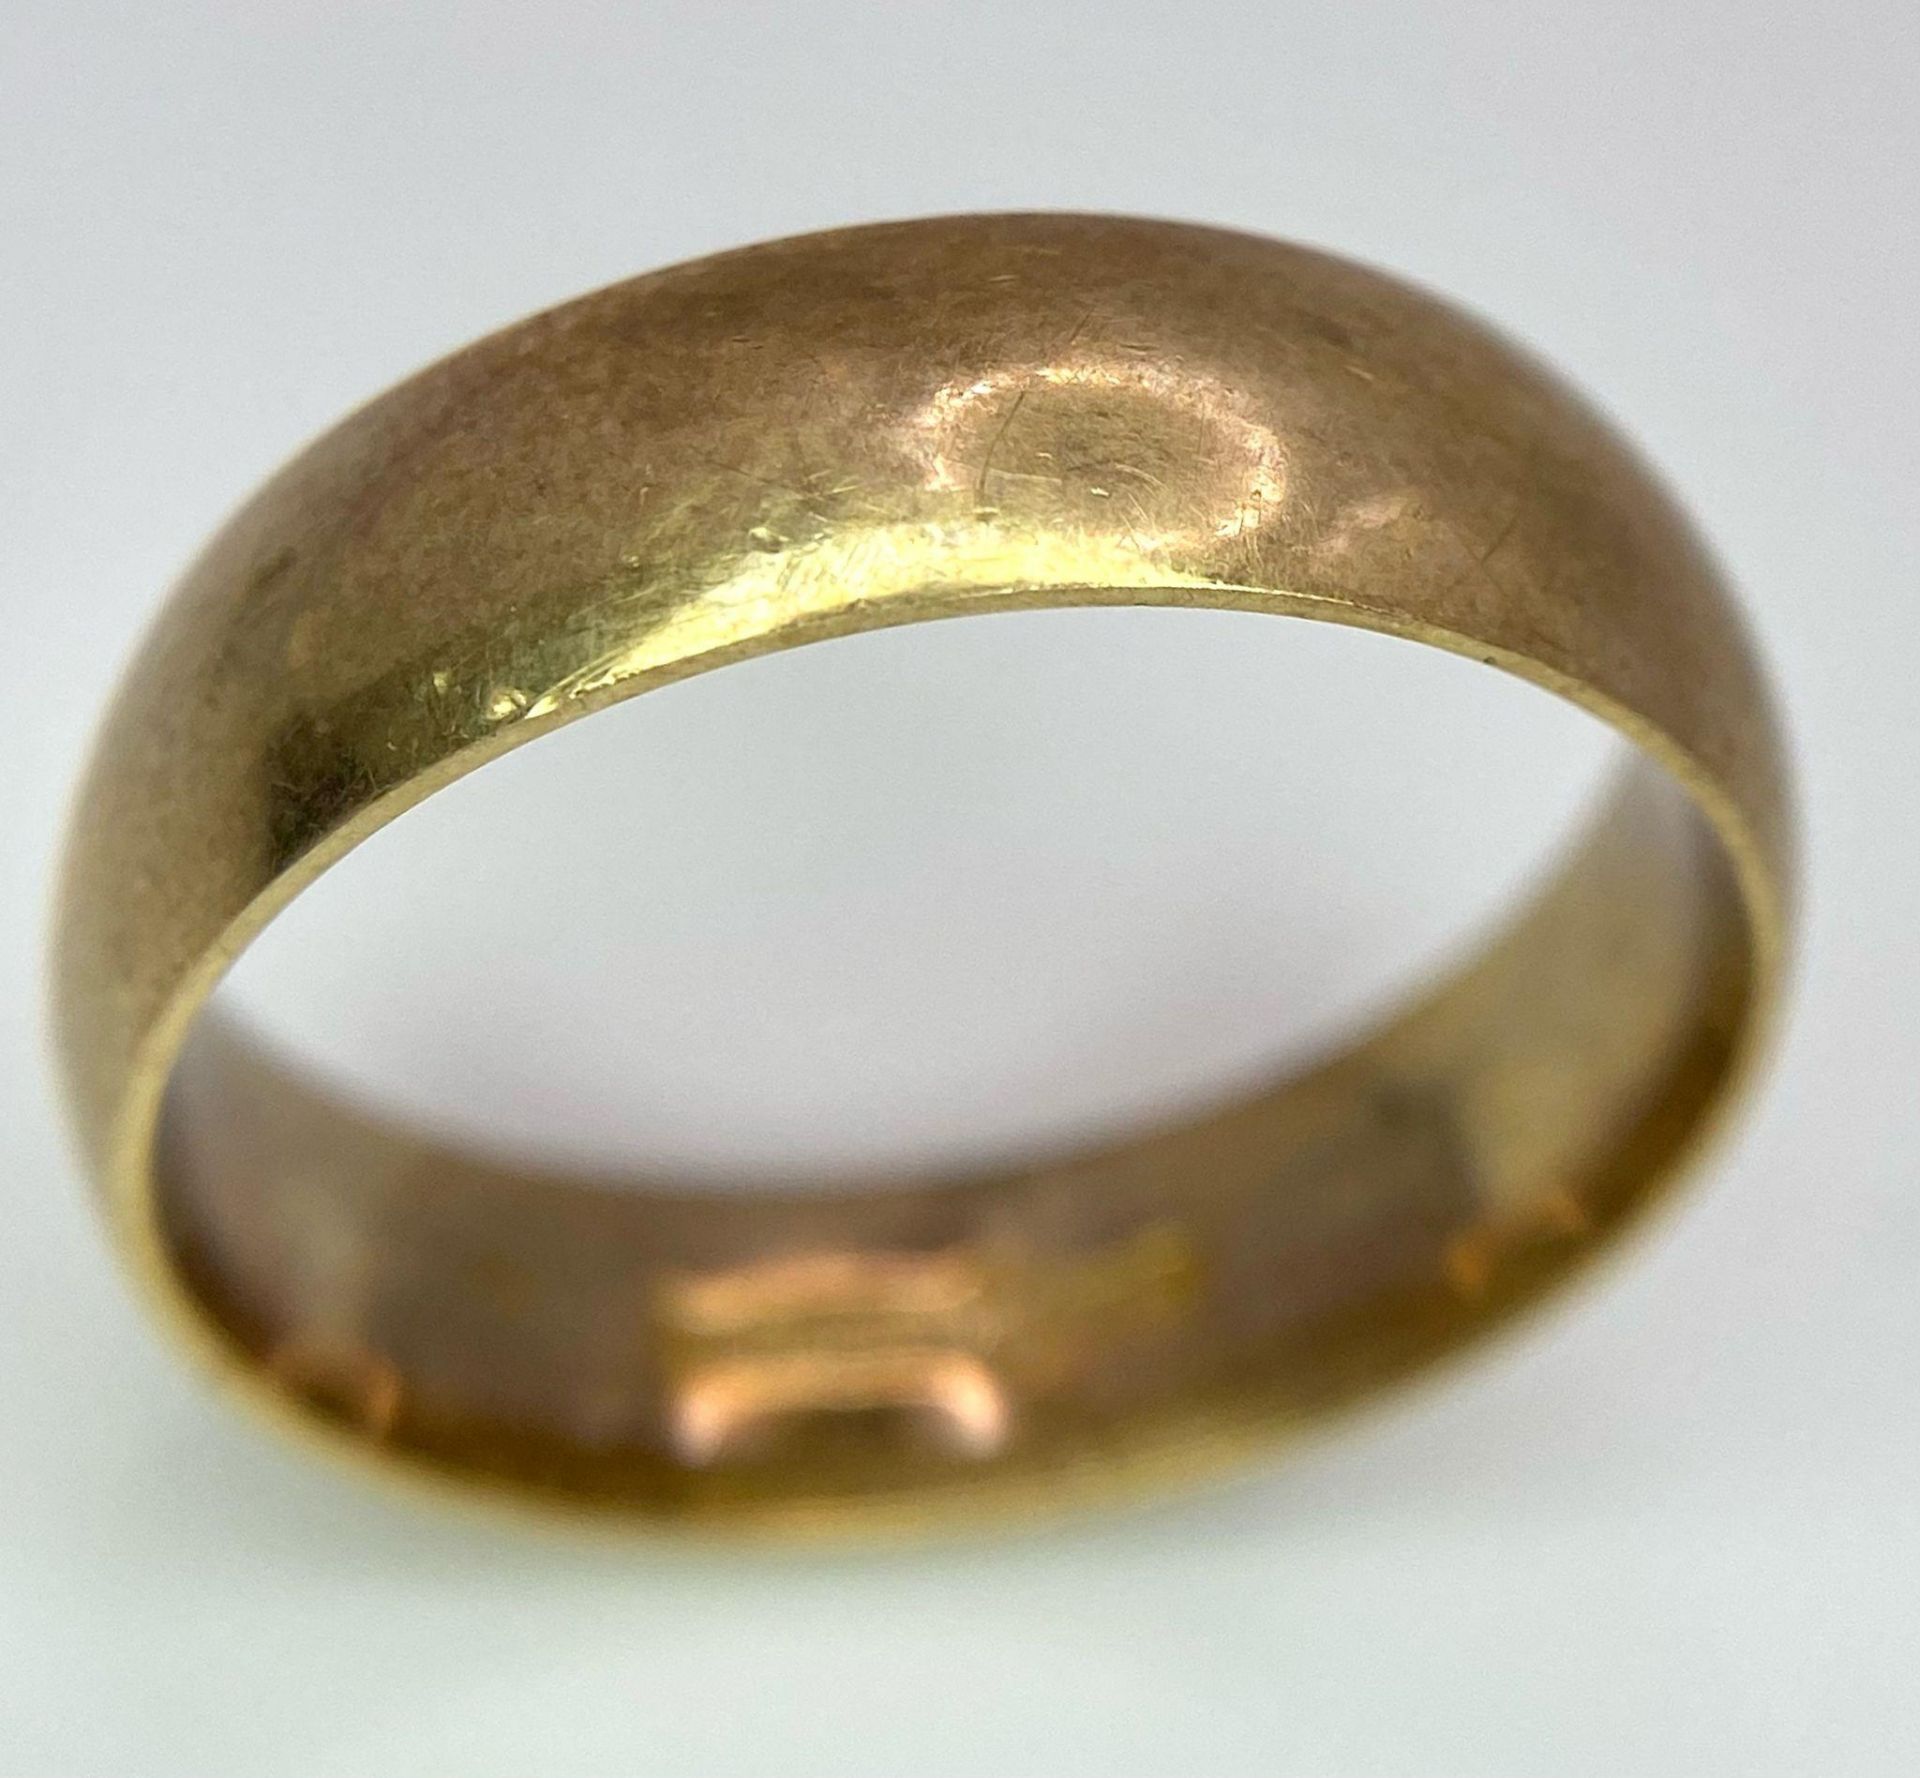 A Vintage 9K Yellow Gold Band Ring. 6mm width. Size T. 5.05g weight. Full UK hallmarks. - Image 3 of 5